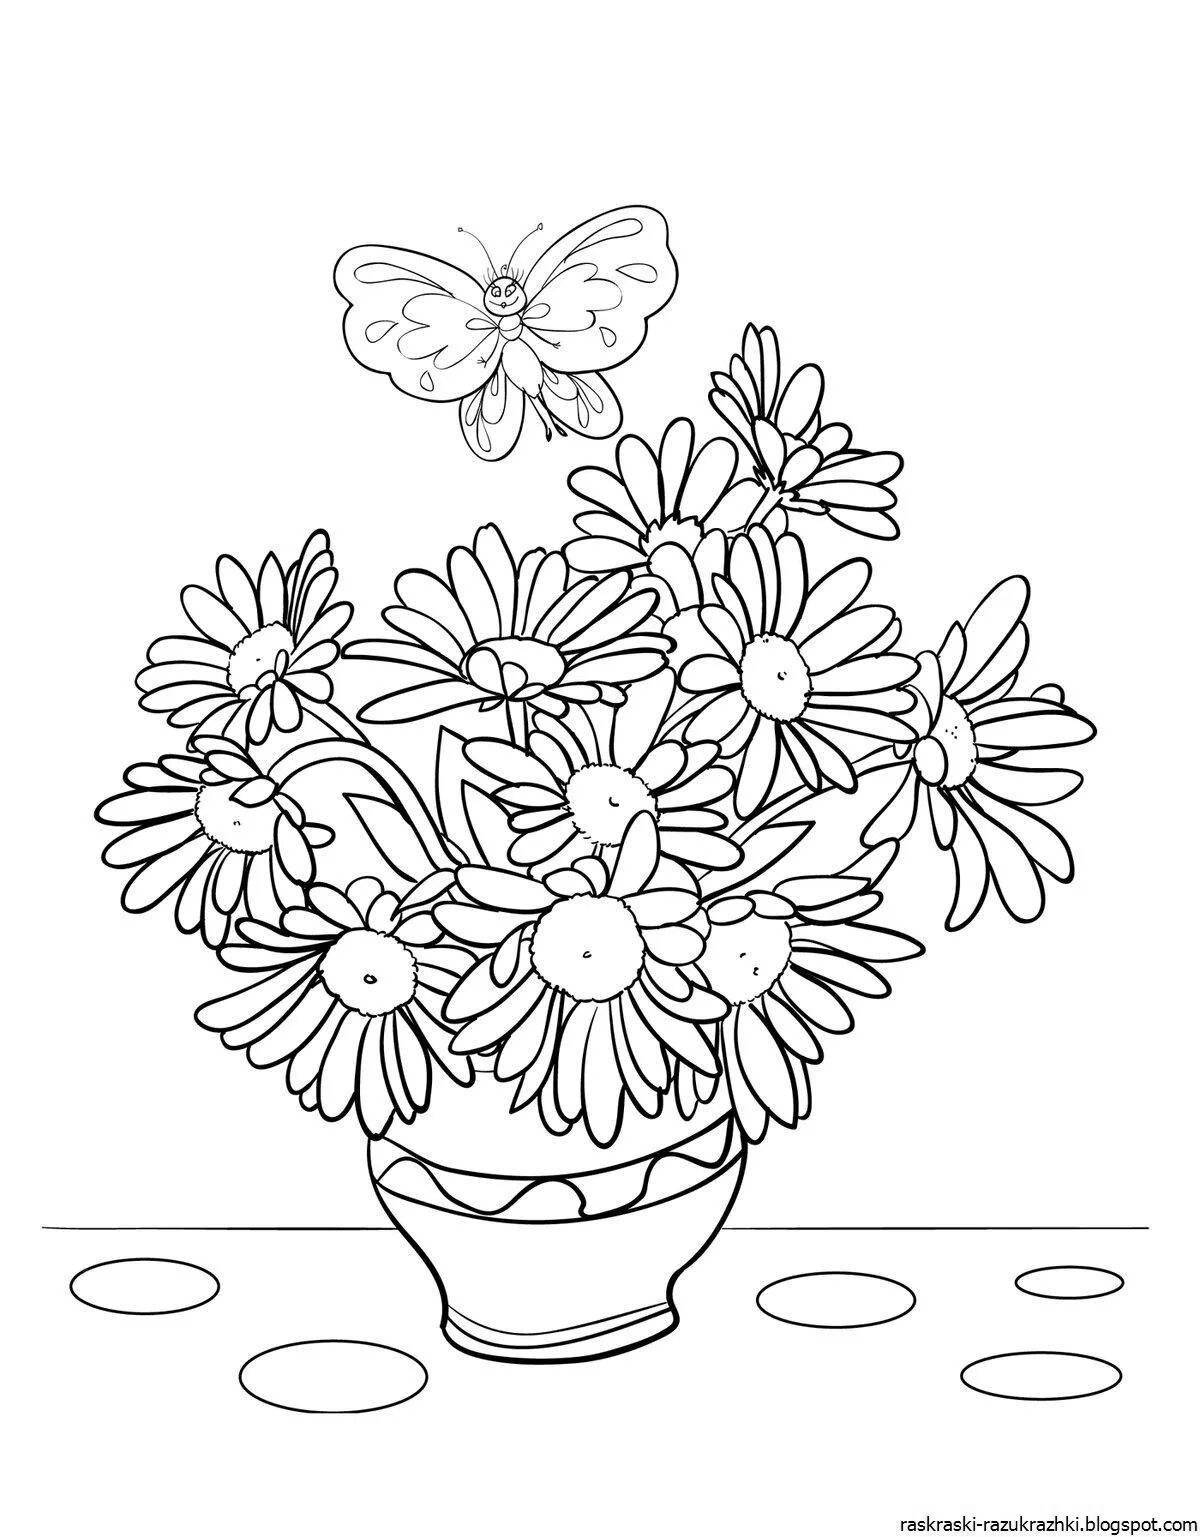 Coloring book glowing bouquet of daisies